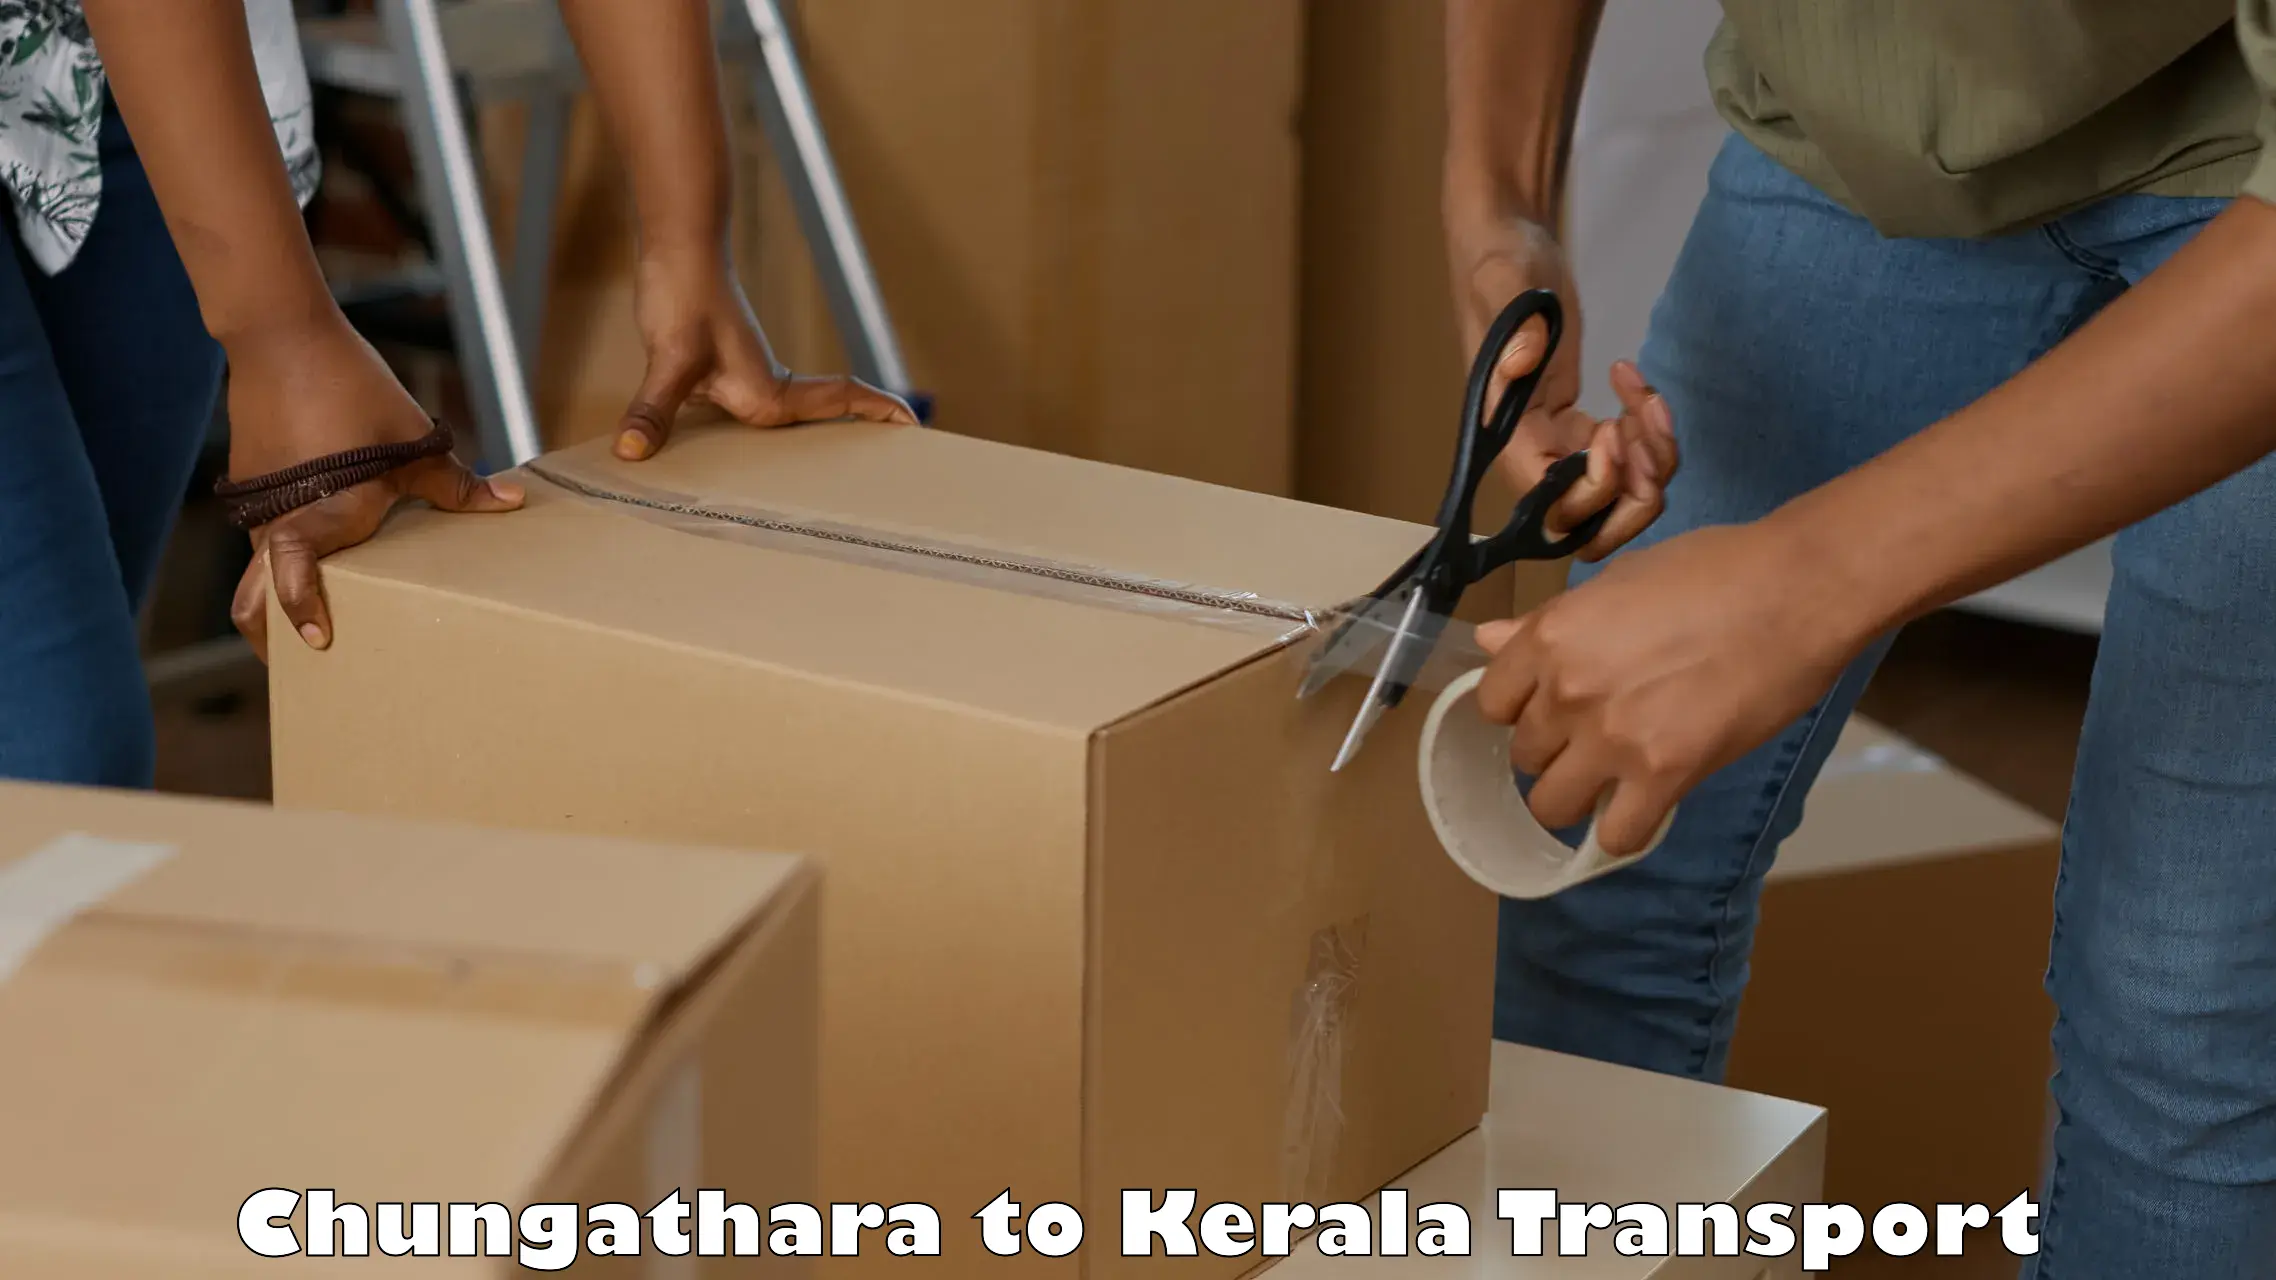 Truck transport companies in India Chungathara to Angamaly